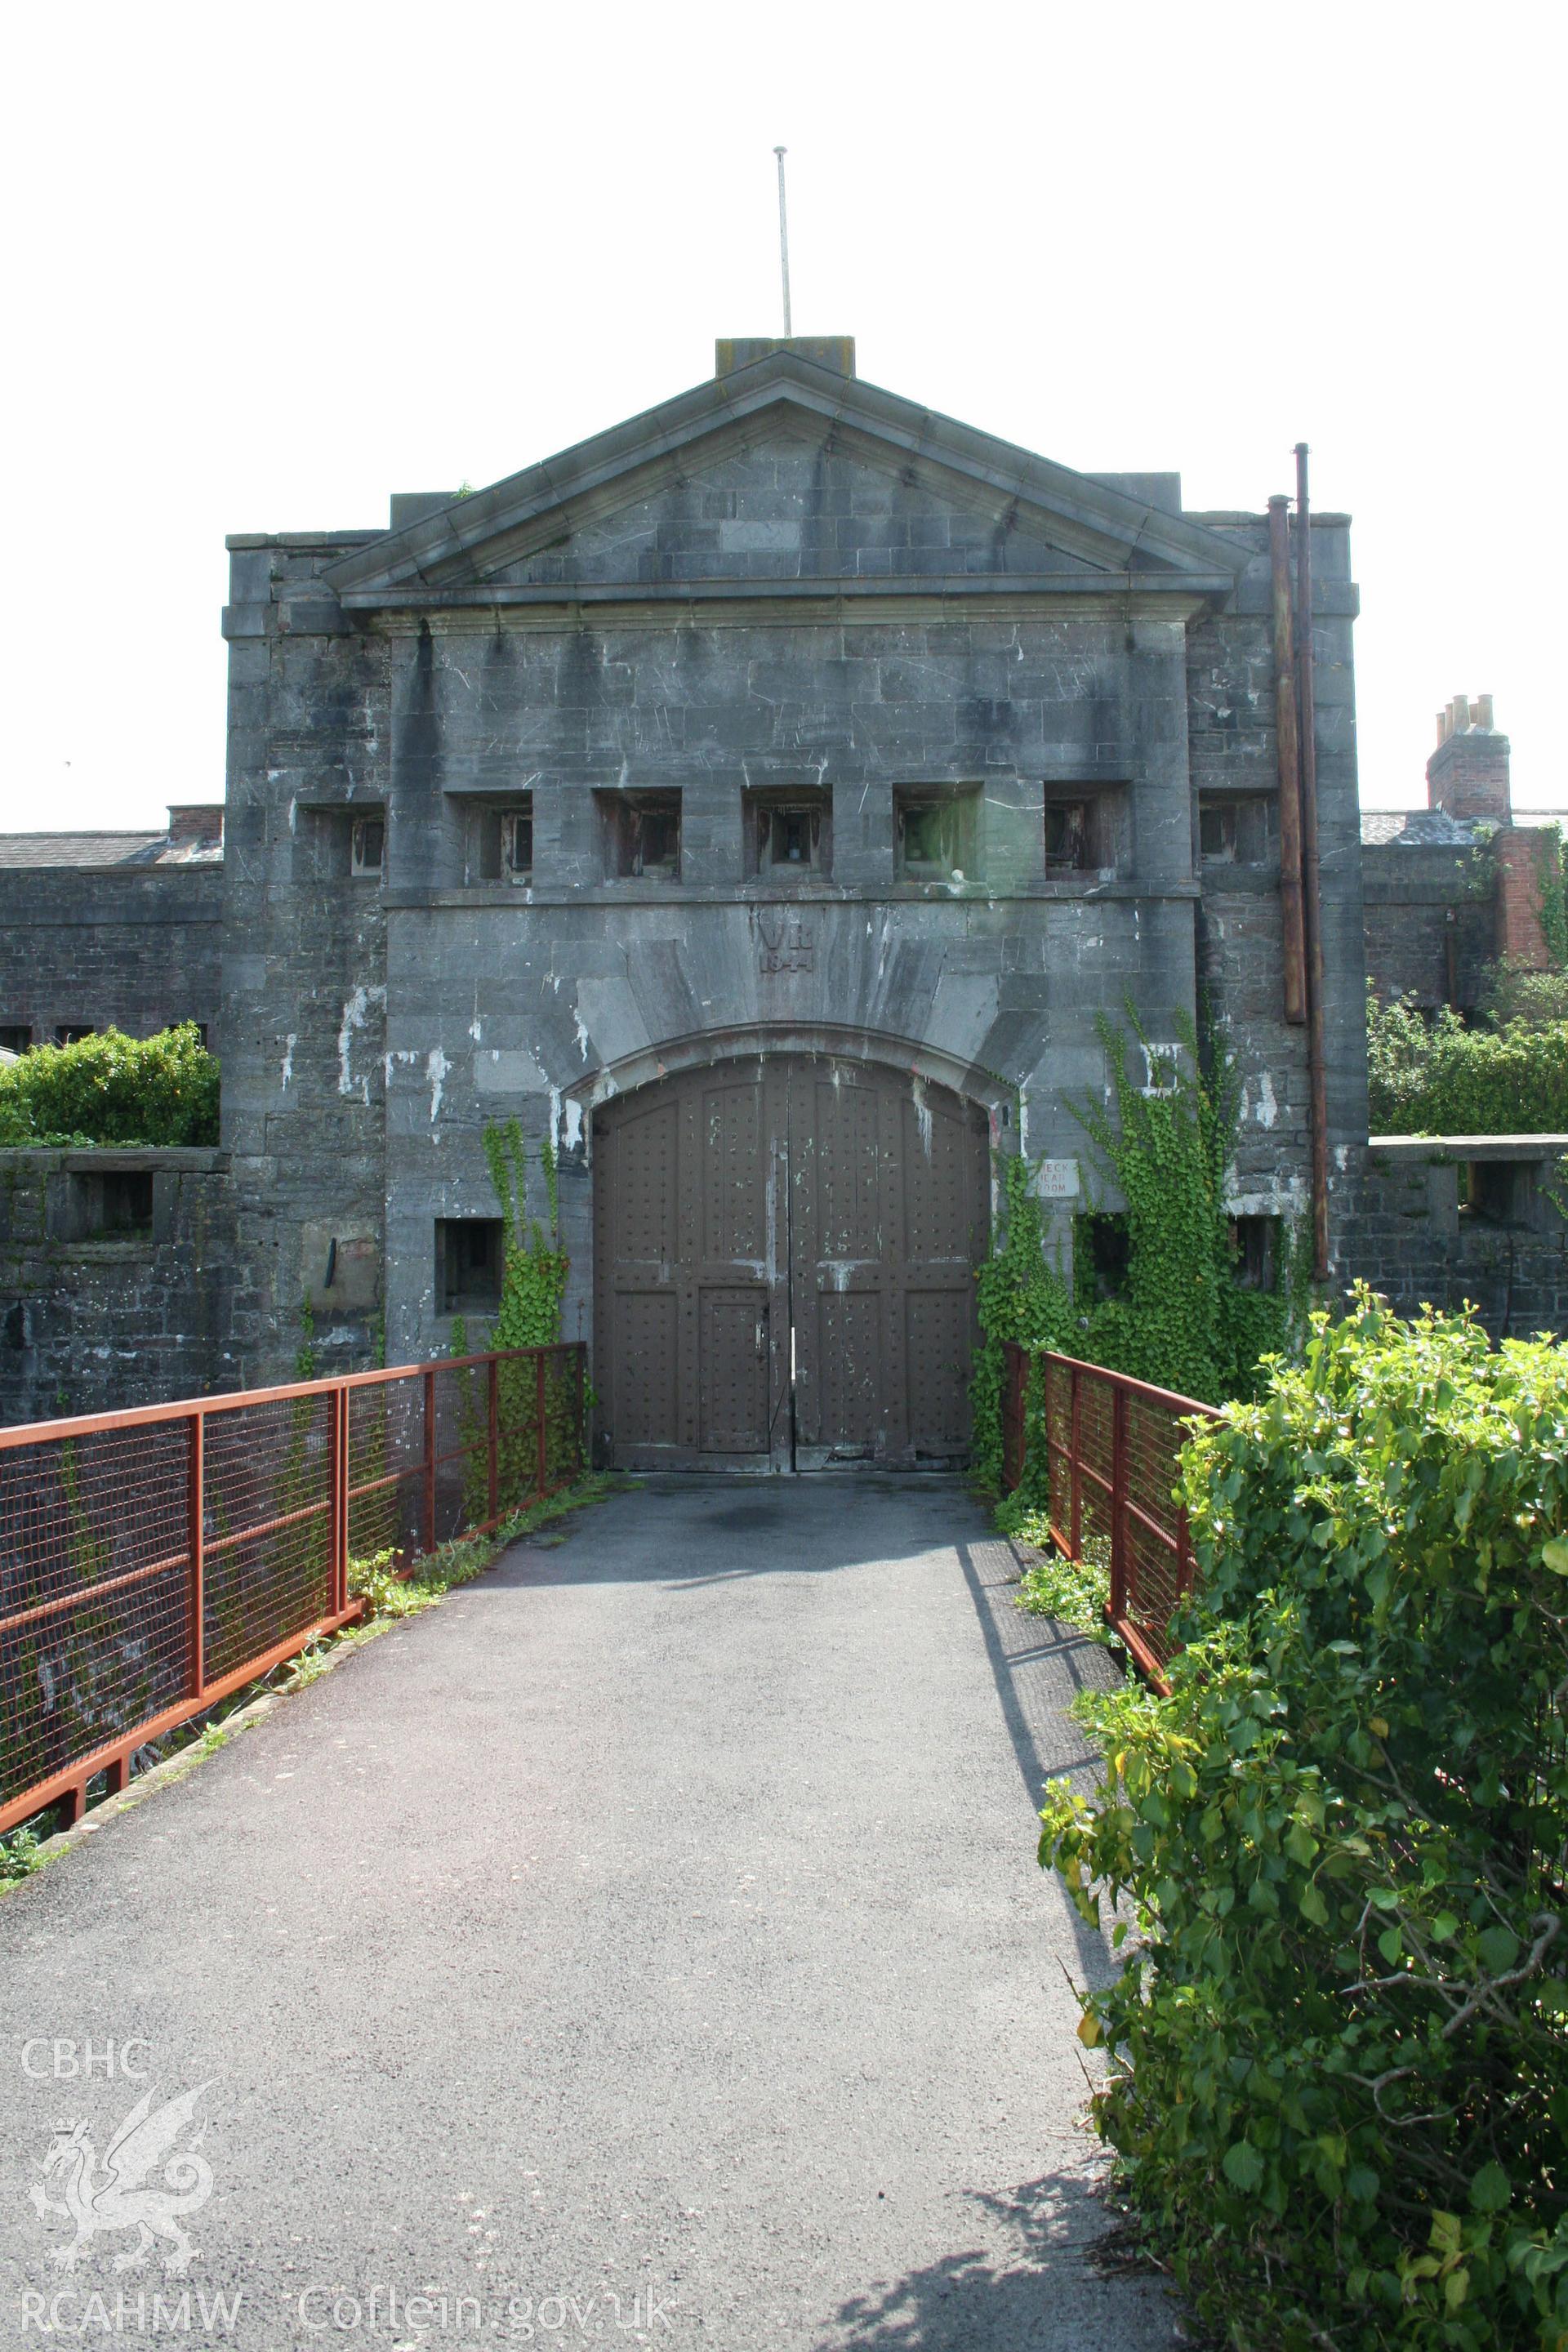 The Former Defensible Barracks, the main gatehouse looking south.